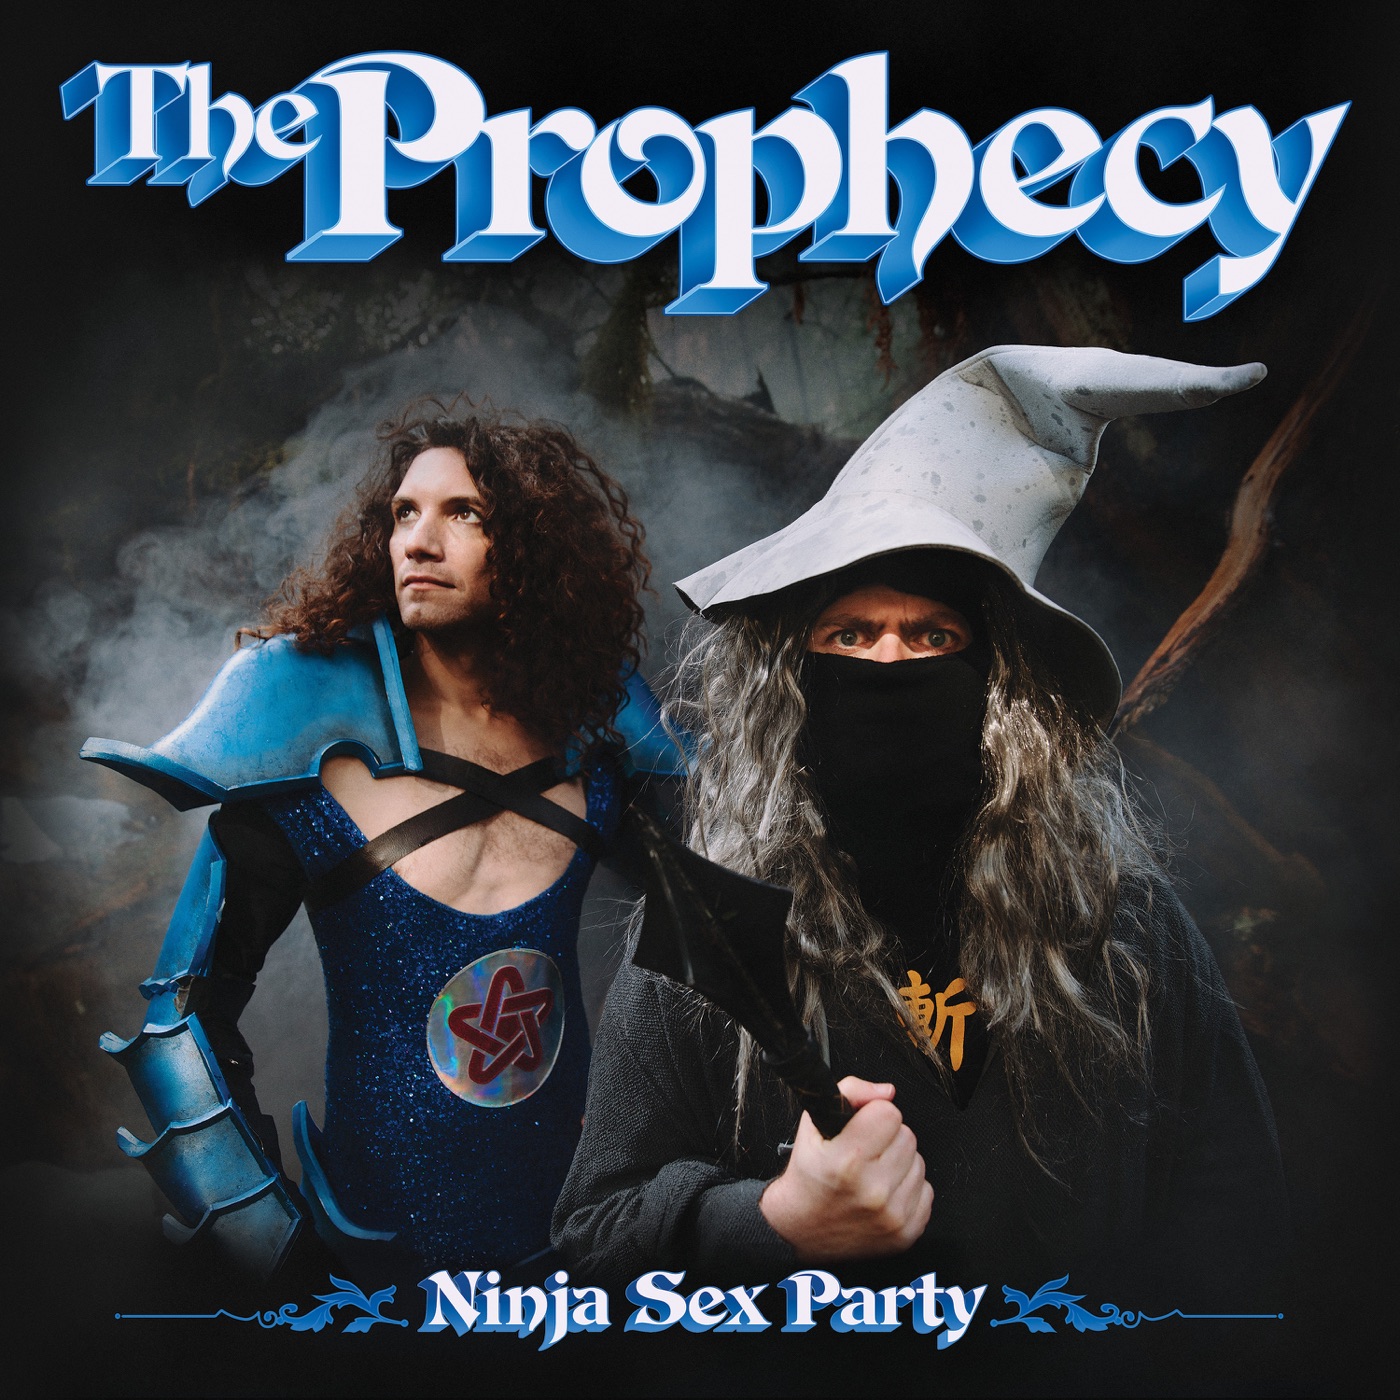 The Prophecy by Ninja Sex Party